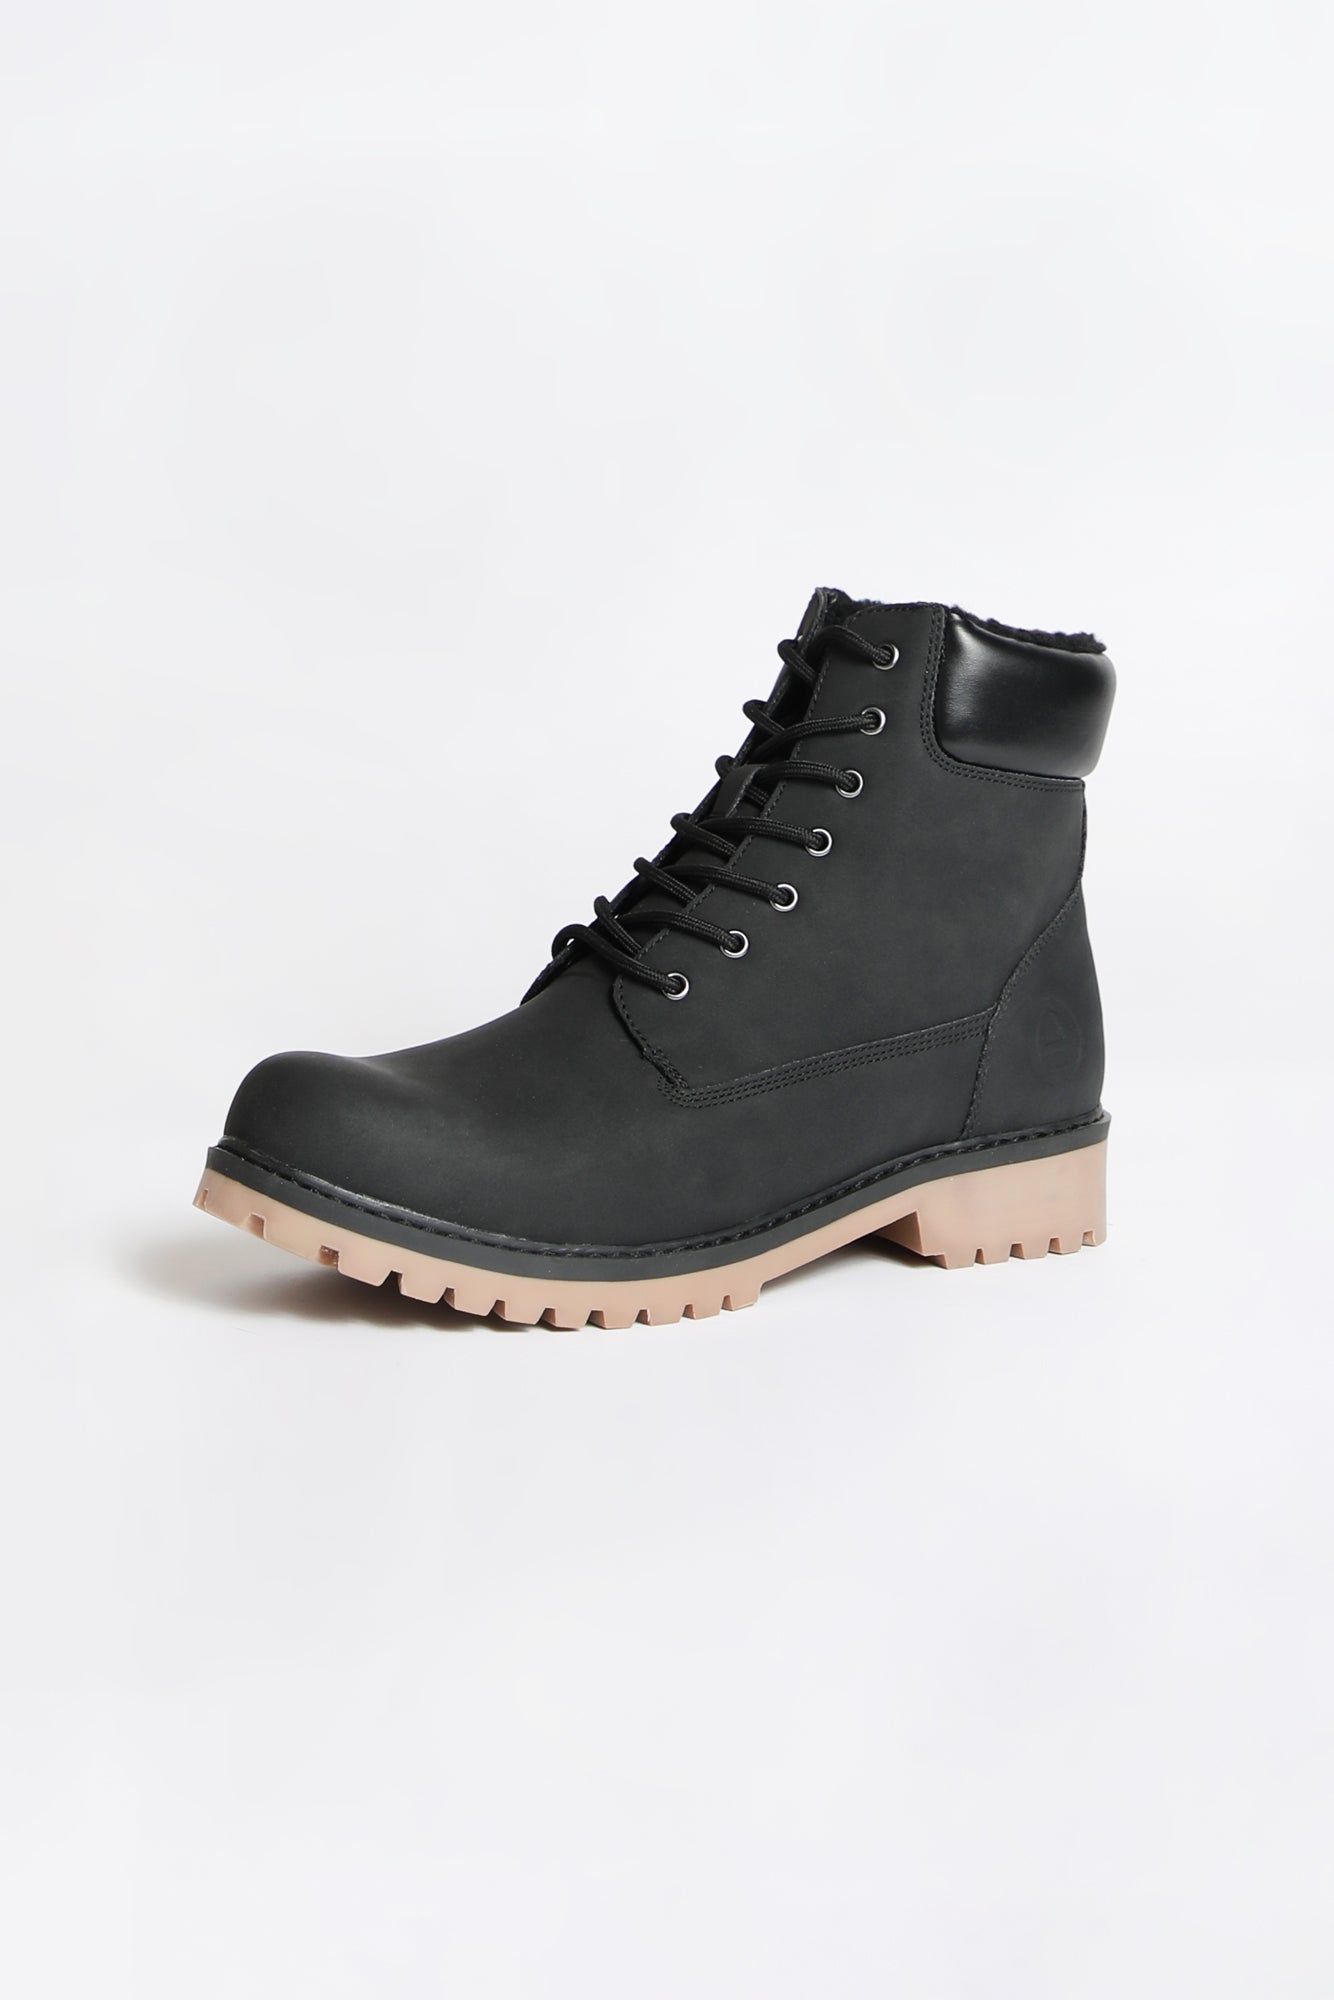 Amnesia Youth Fur Lined Hiker Boot - /